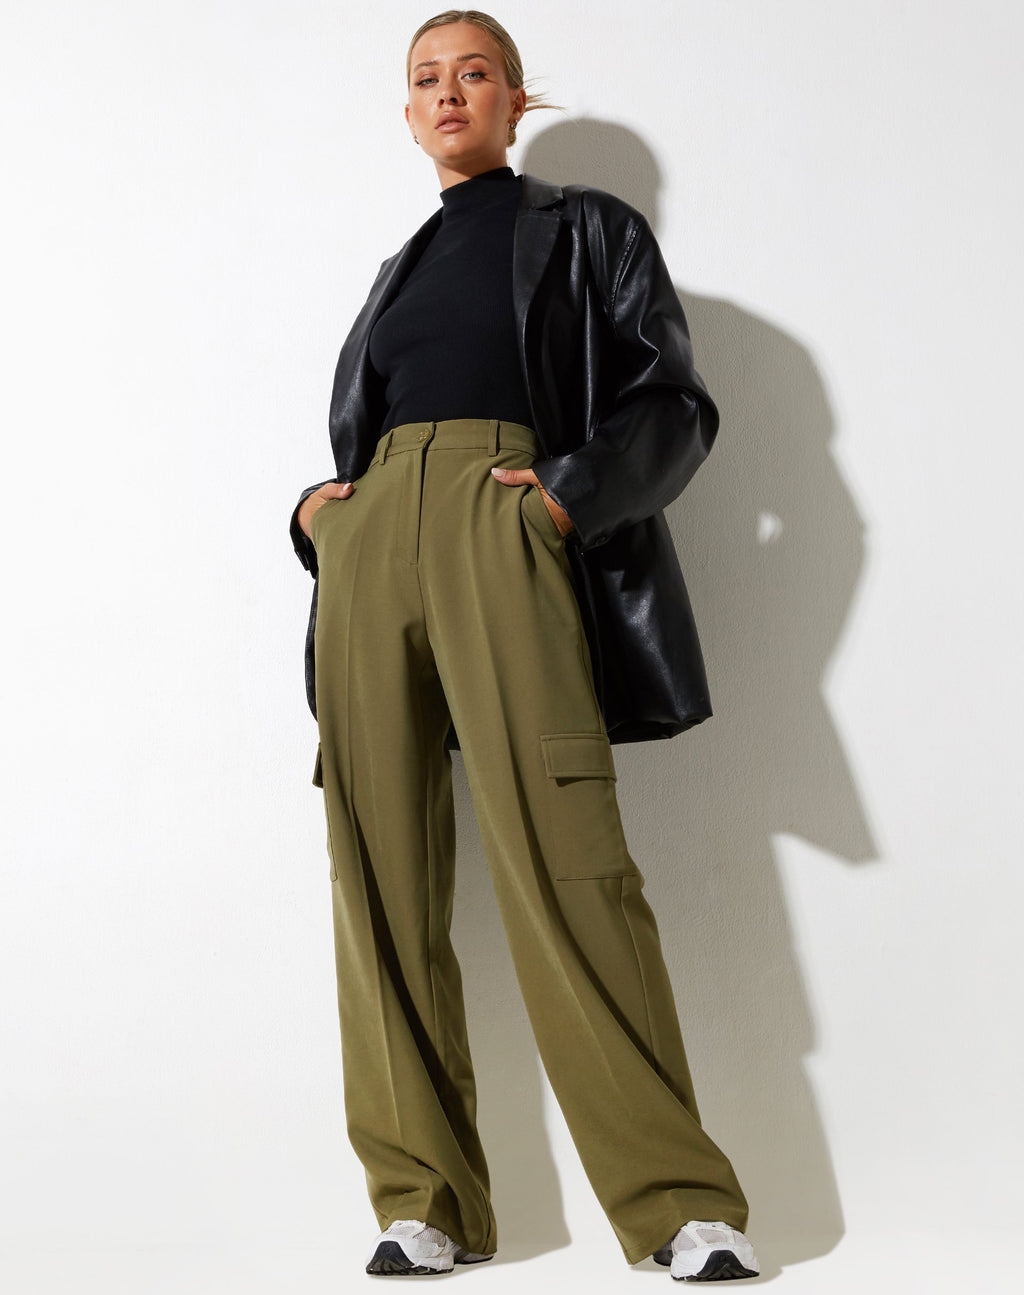 Abba Trouser in Cargo Pocket Olive 25